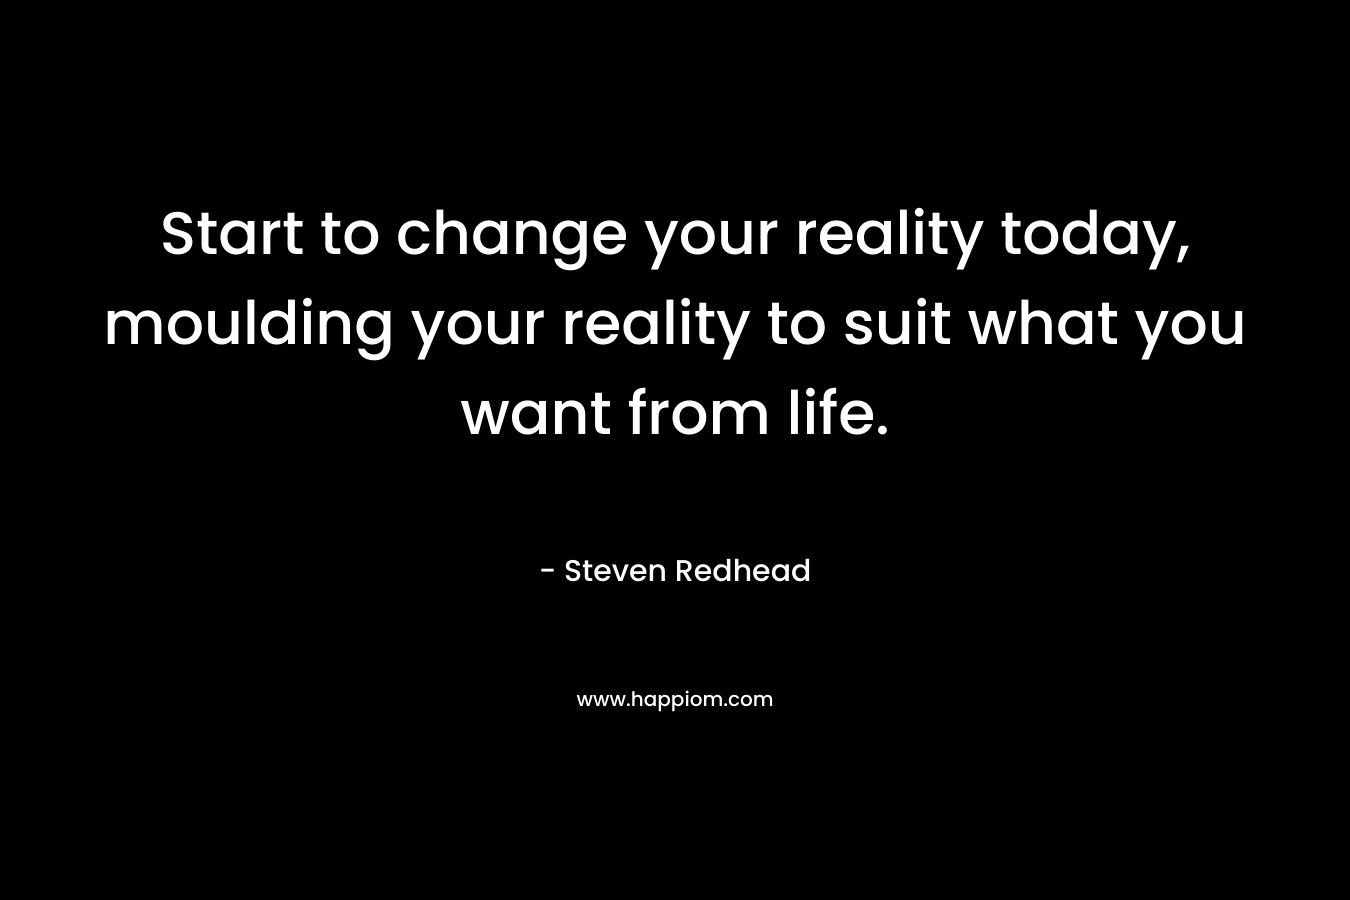 Start to change your reality today, moulding your reality to suit what you want from life.